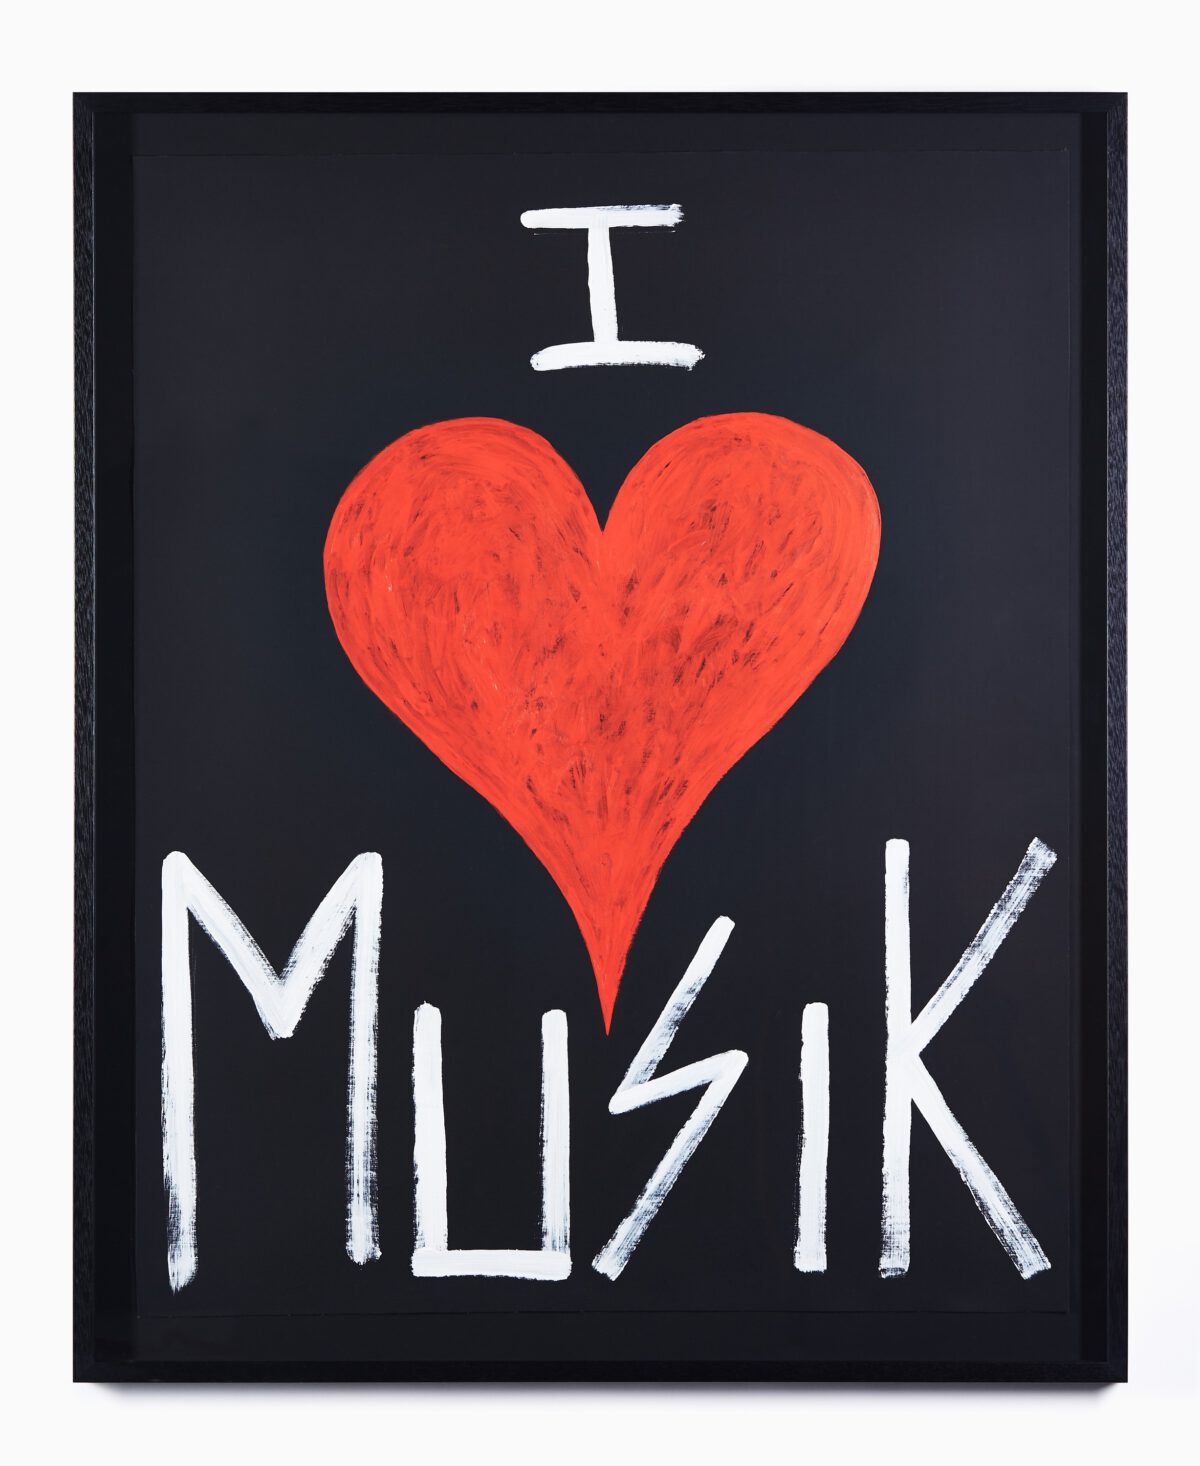 And MUSIK Loves Me web